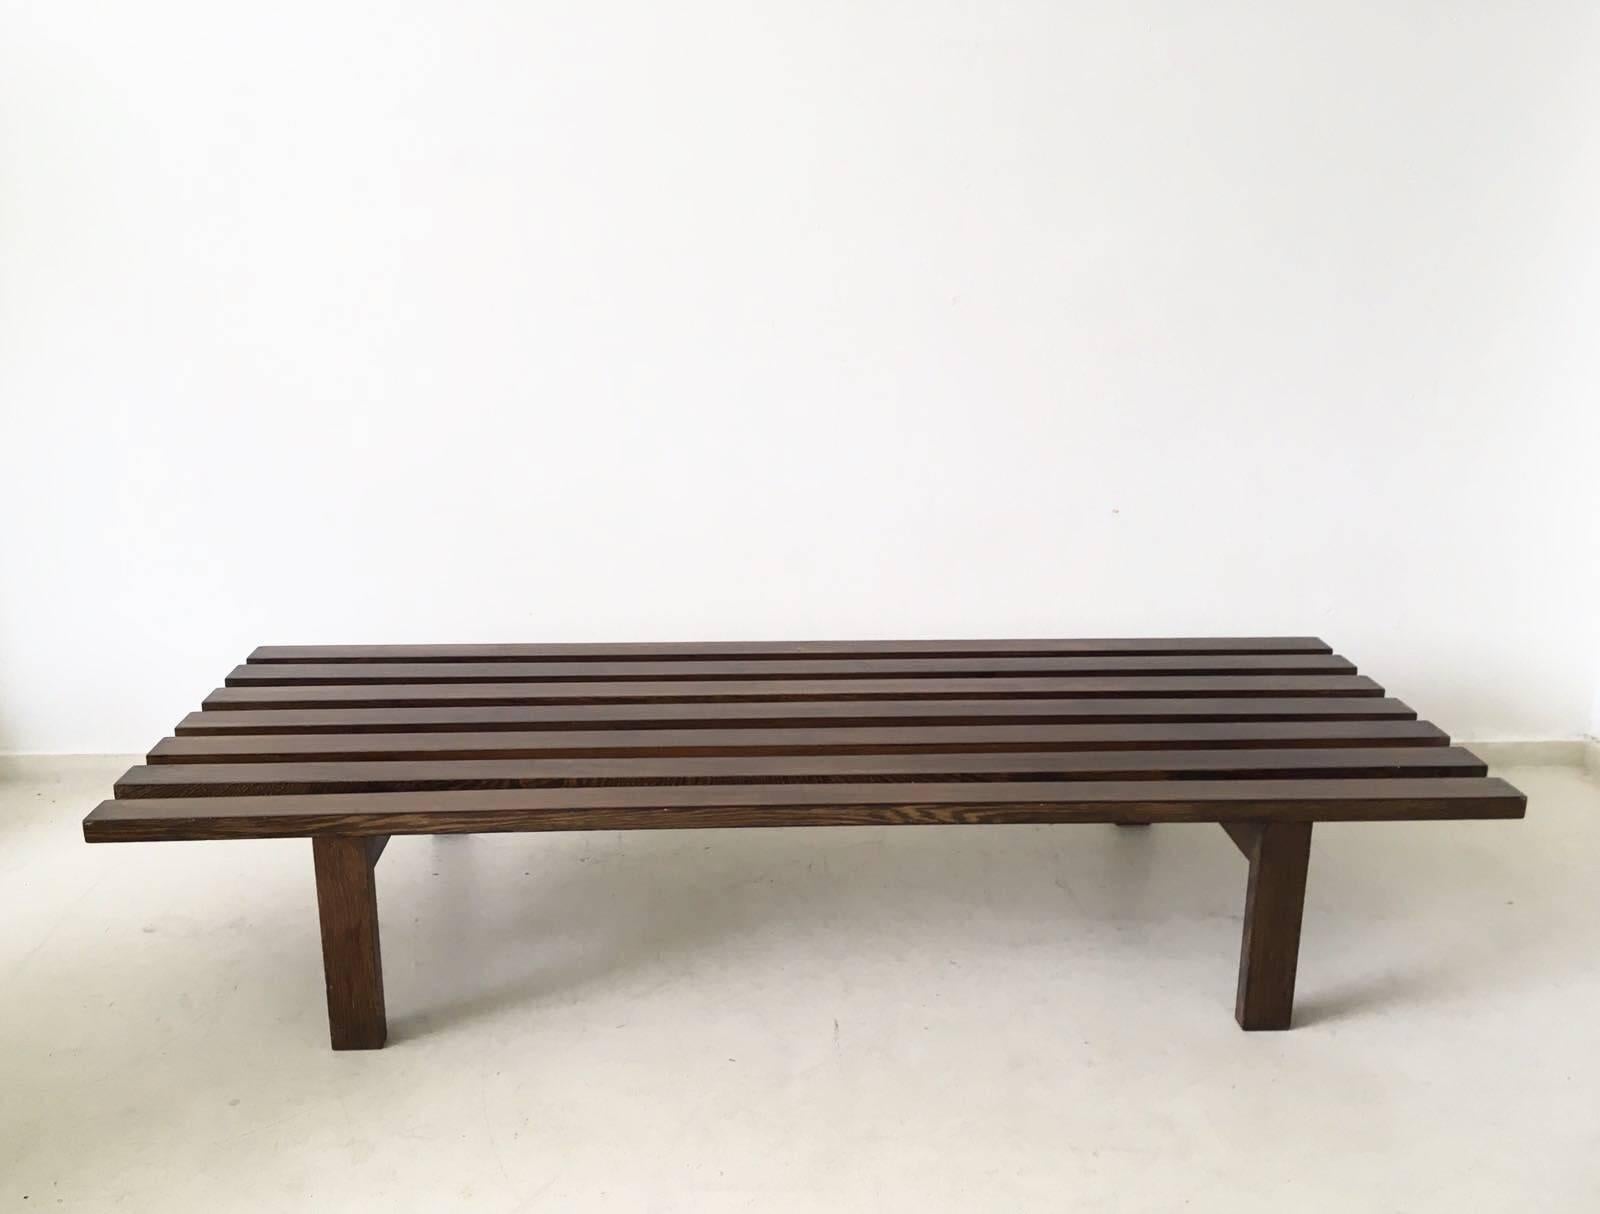 Superb Dutch design slat bench in Wenge wood, designed by Martin Visser for 't Spectrum Bergeijk. 

Originally this bench was designed for Stedelijk museum Amsterdam. It can be used as a bench or coffee table. This item is in very good condition